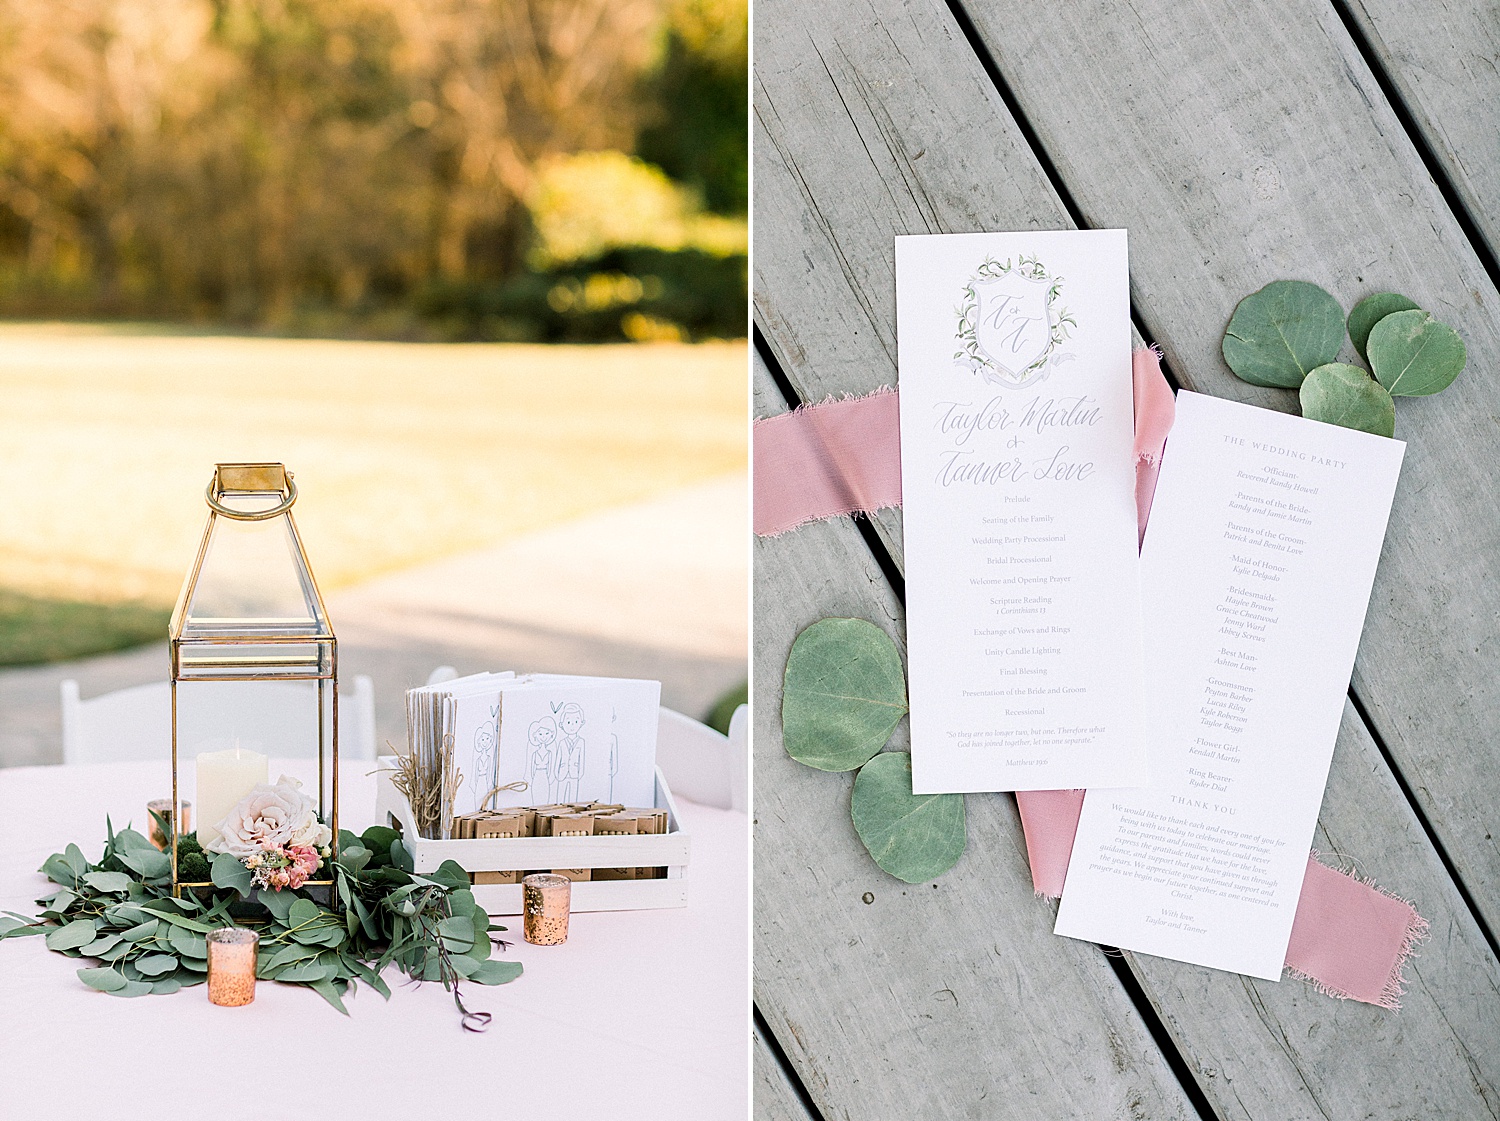 table setting and wedding program details